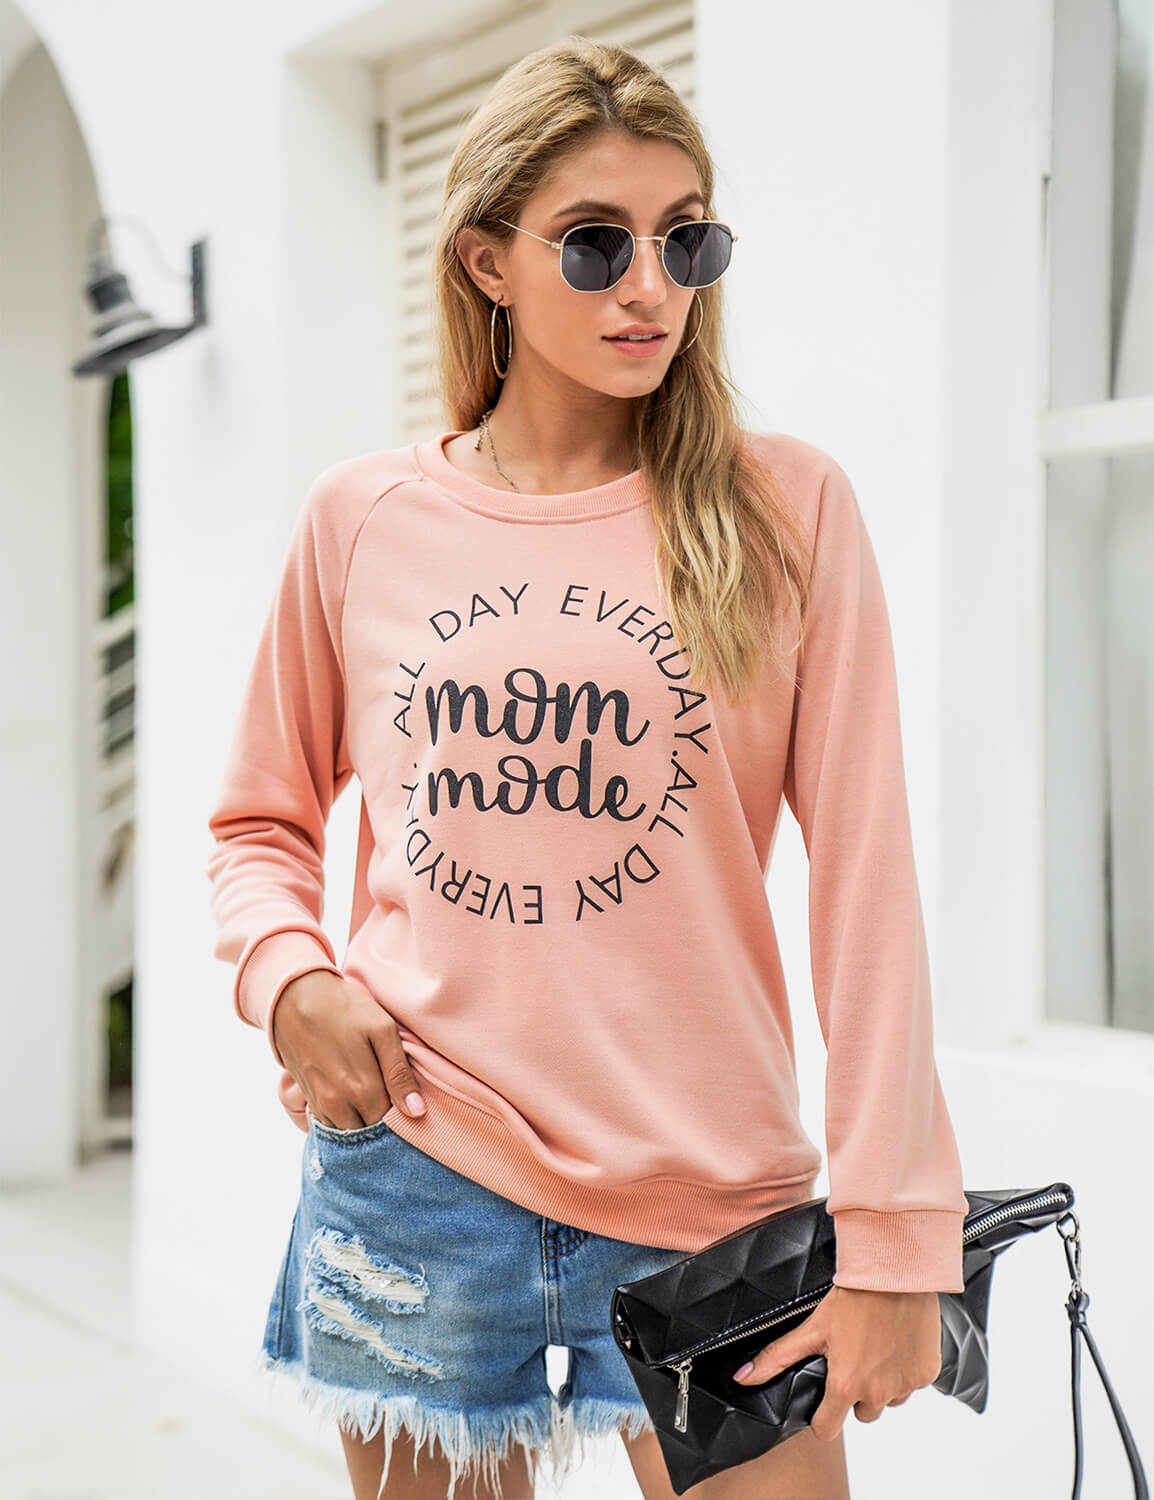 Blooming Jelly_Mom Mode All Day Everyday Sweatshirt_Letter Print_304026_14_Mom Style Casual Outfits_Tops_Sweatshirt